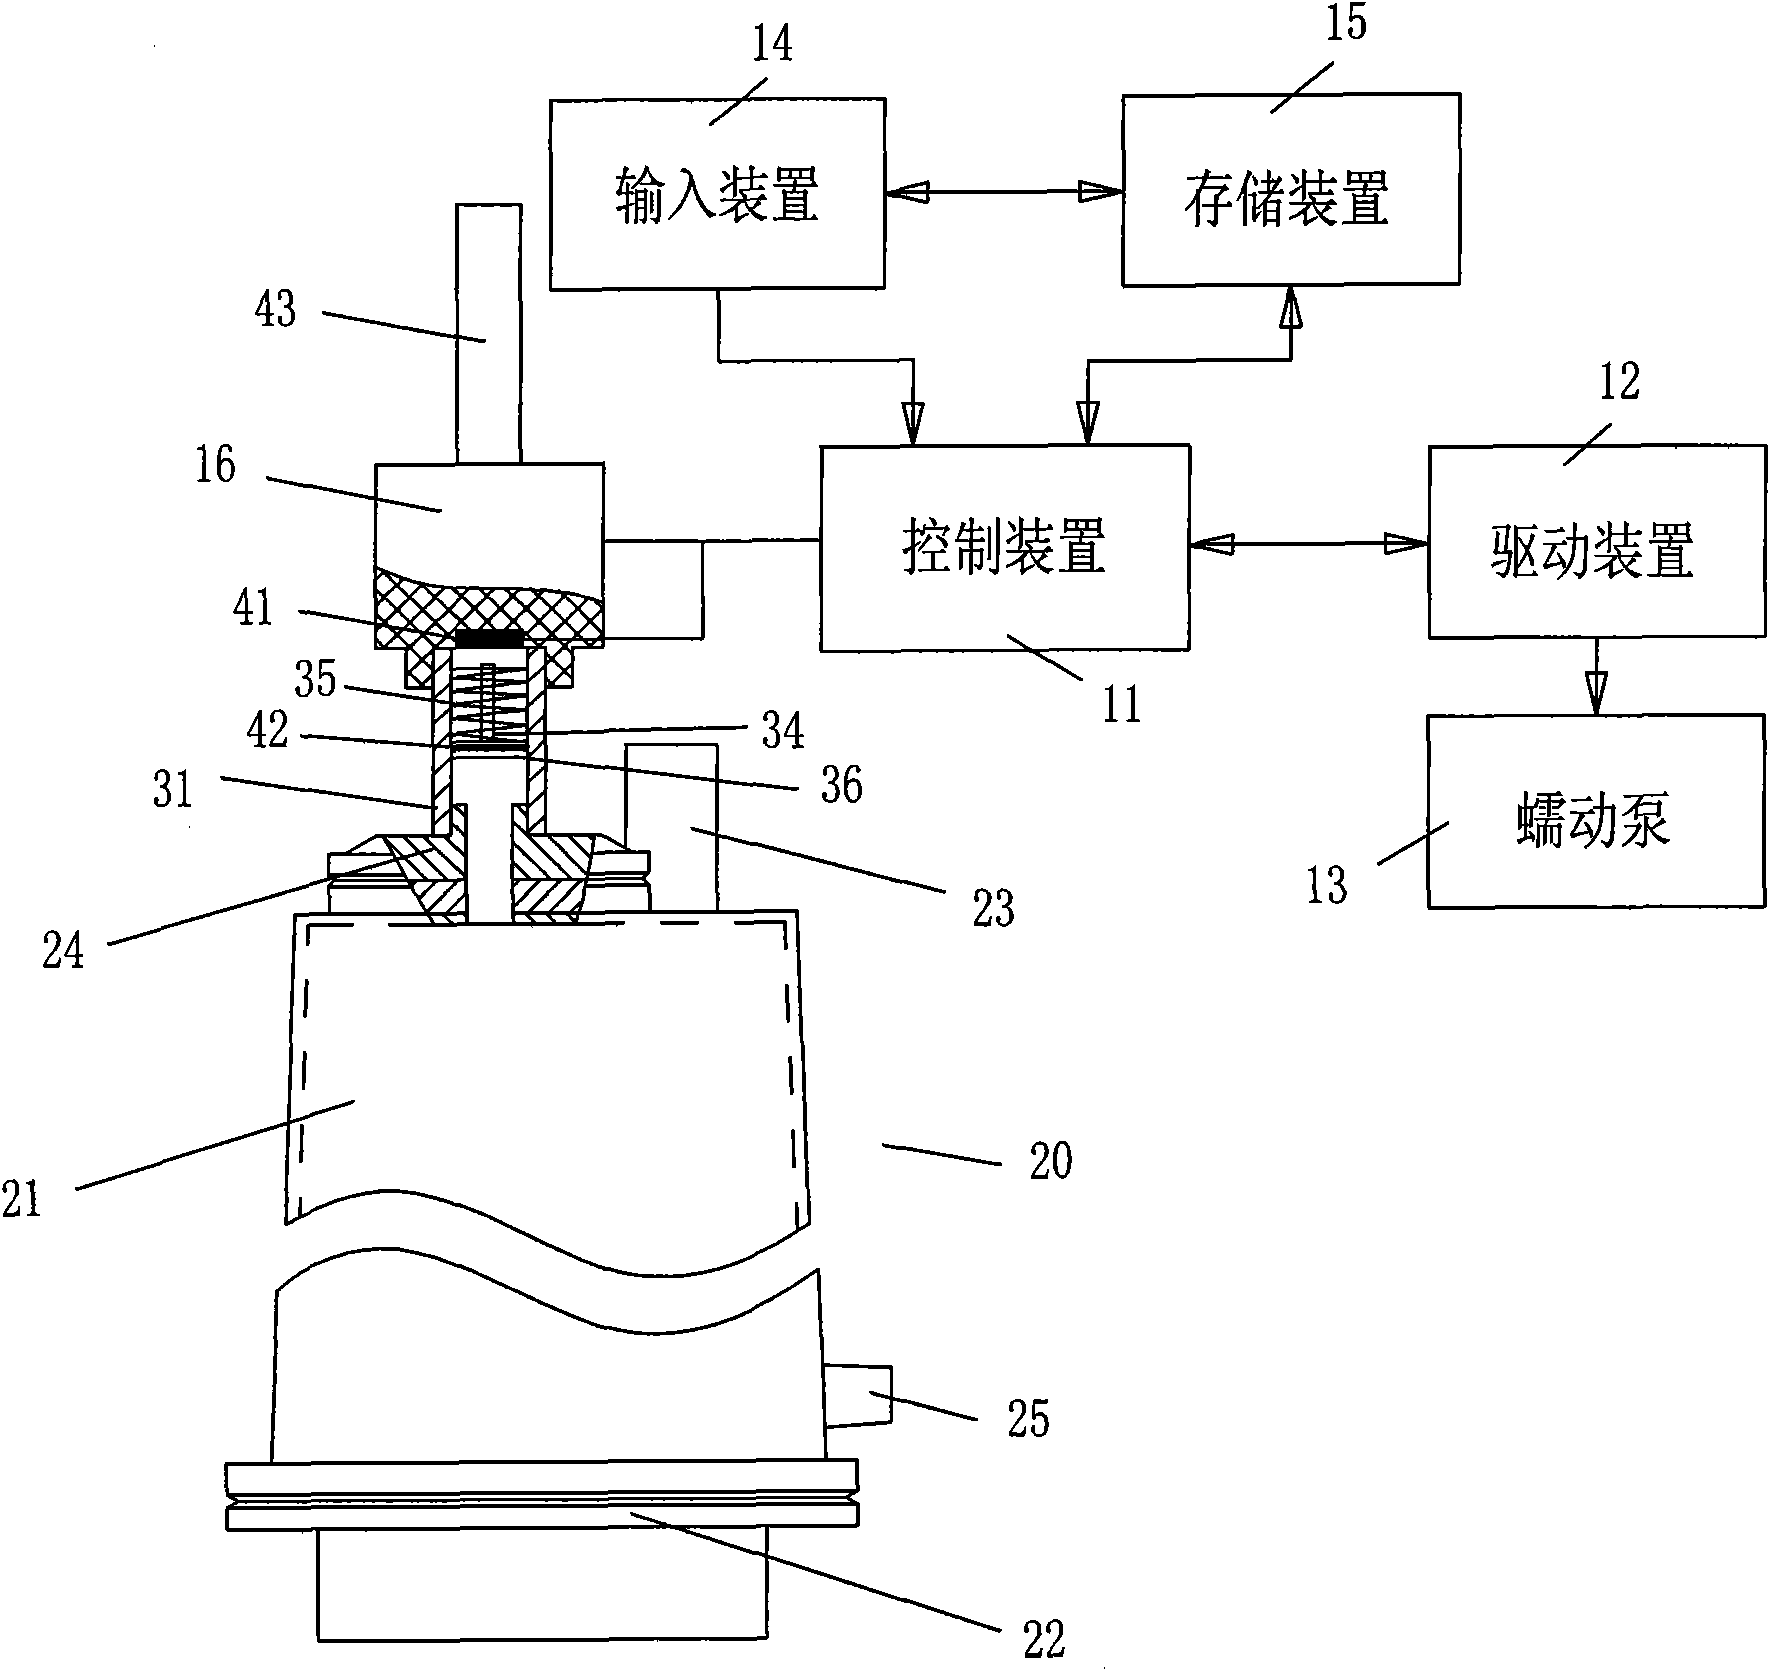 Pressure detection device and microbial detection film system